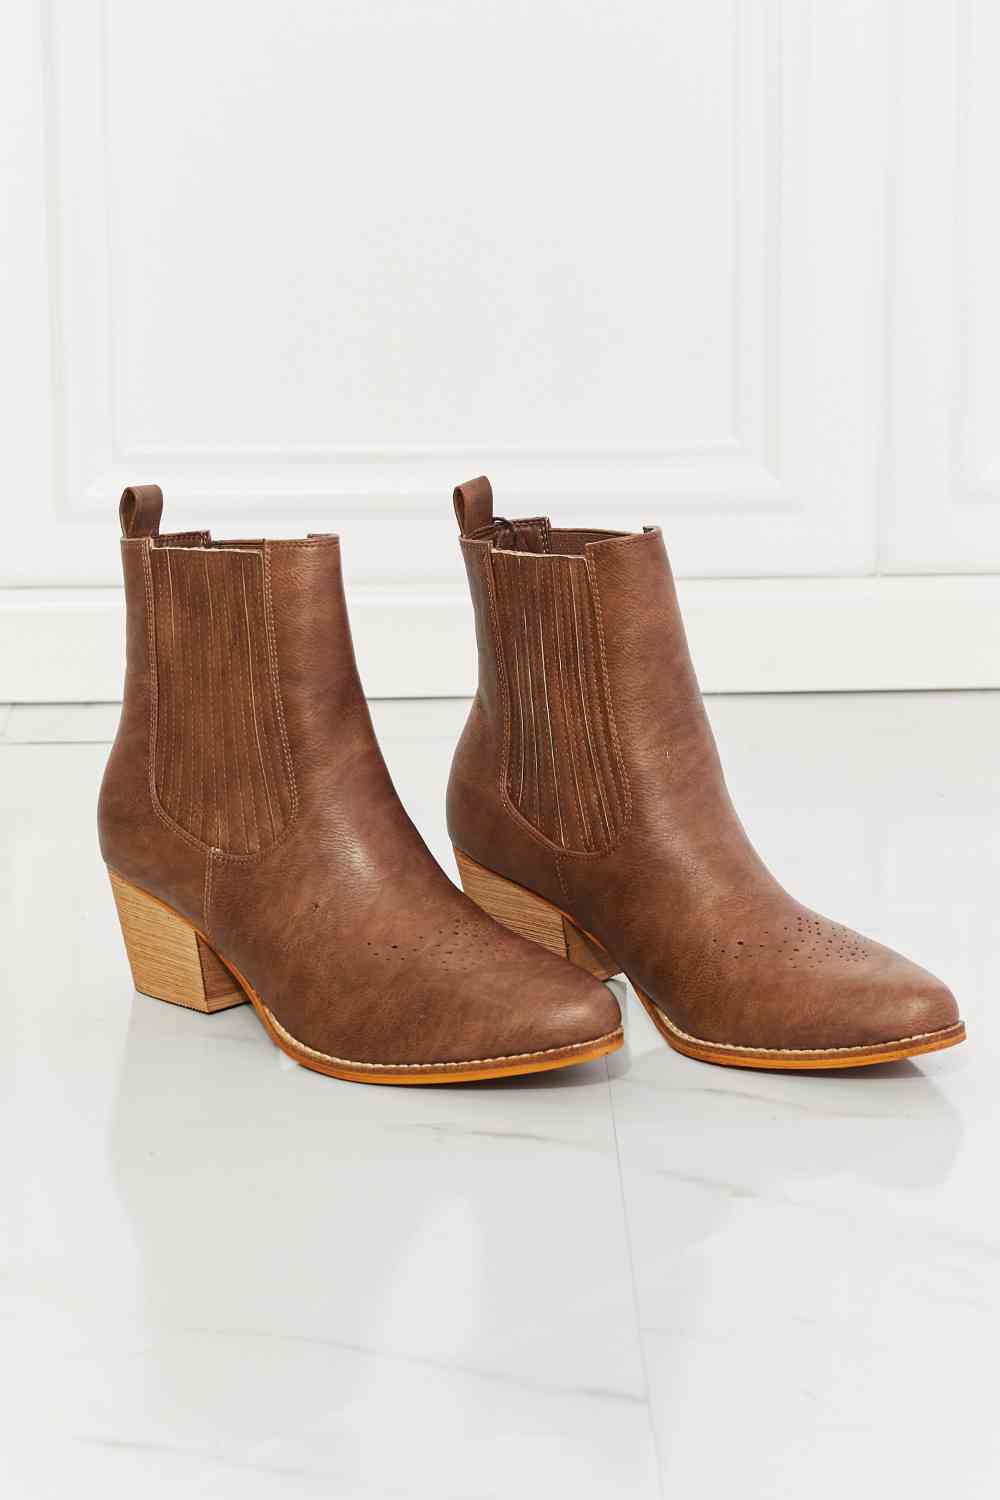 Love the Journey Stacked Heel Chelsea Boot in Chestnut - Accessories - Shoes - 5 - 2024